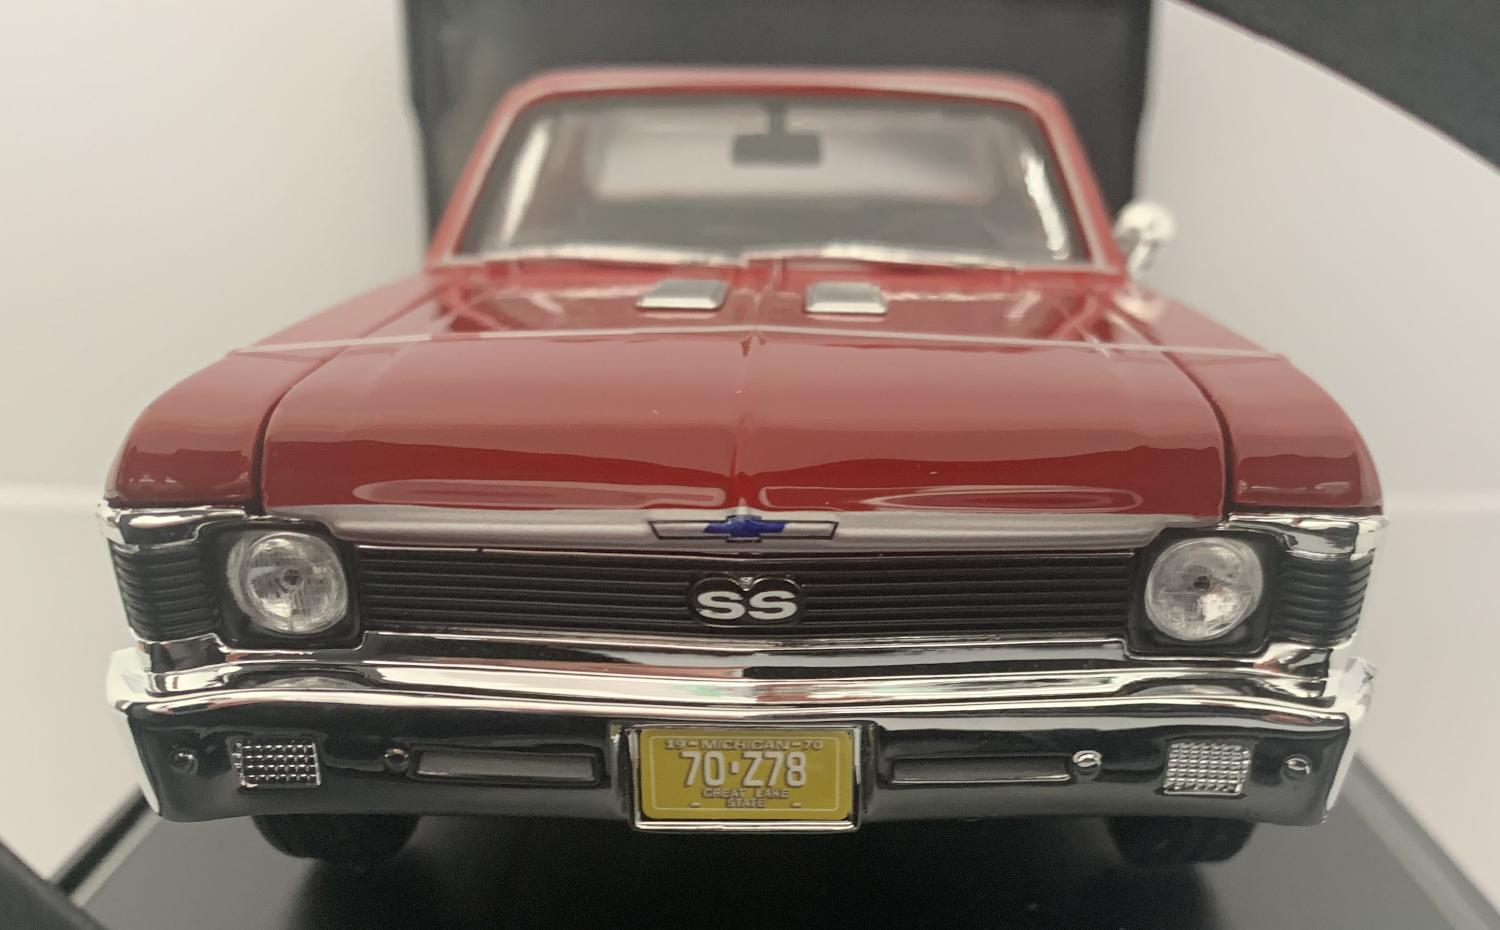 An excellent scale model of a Chevrolet Nova SS Coupe from 1970 decorated in red with bonnet air vents and chrome wheels.